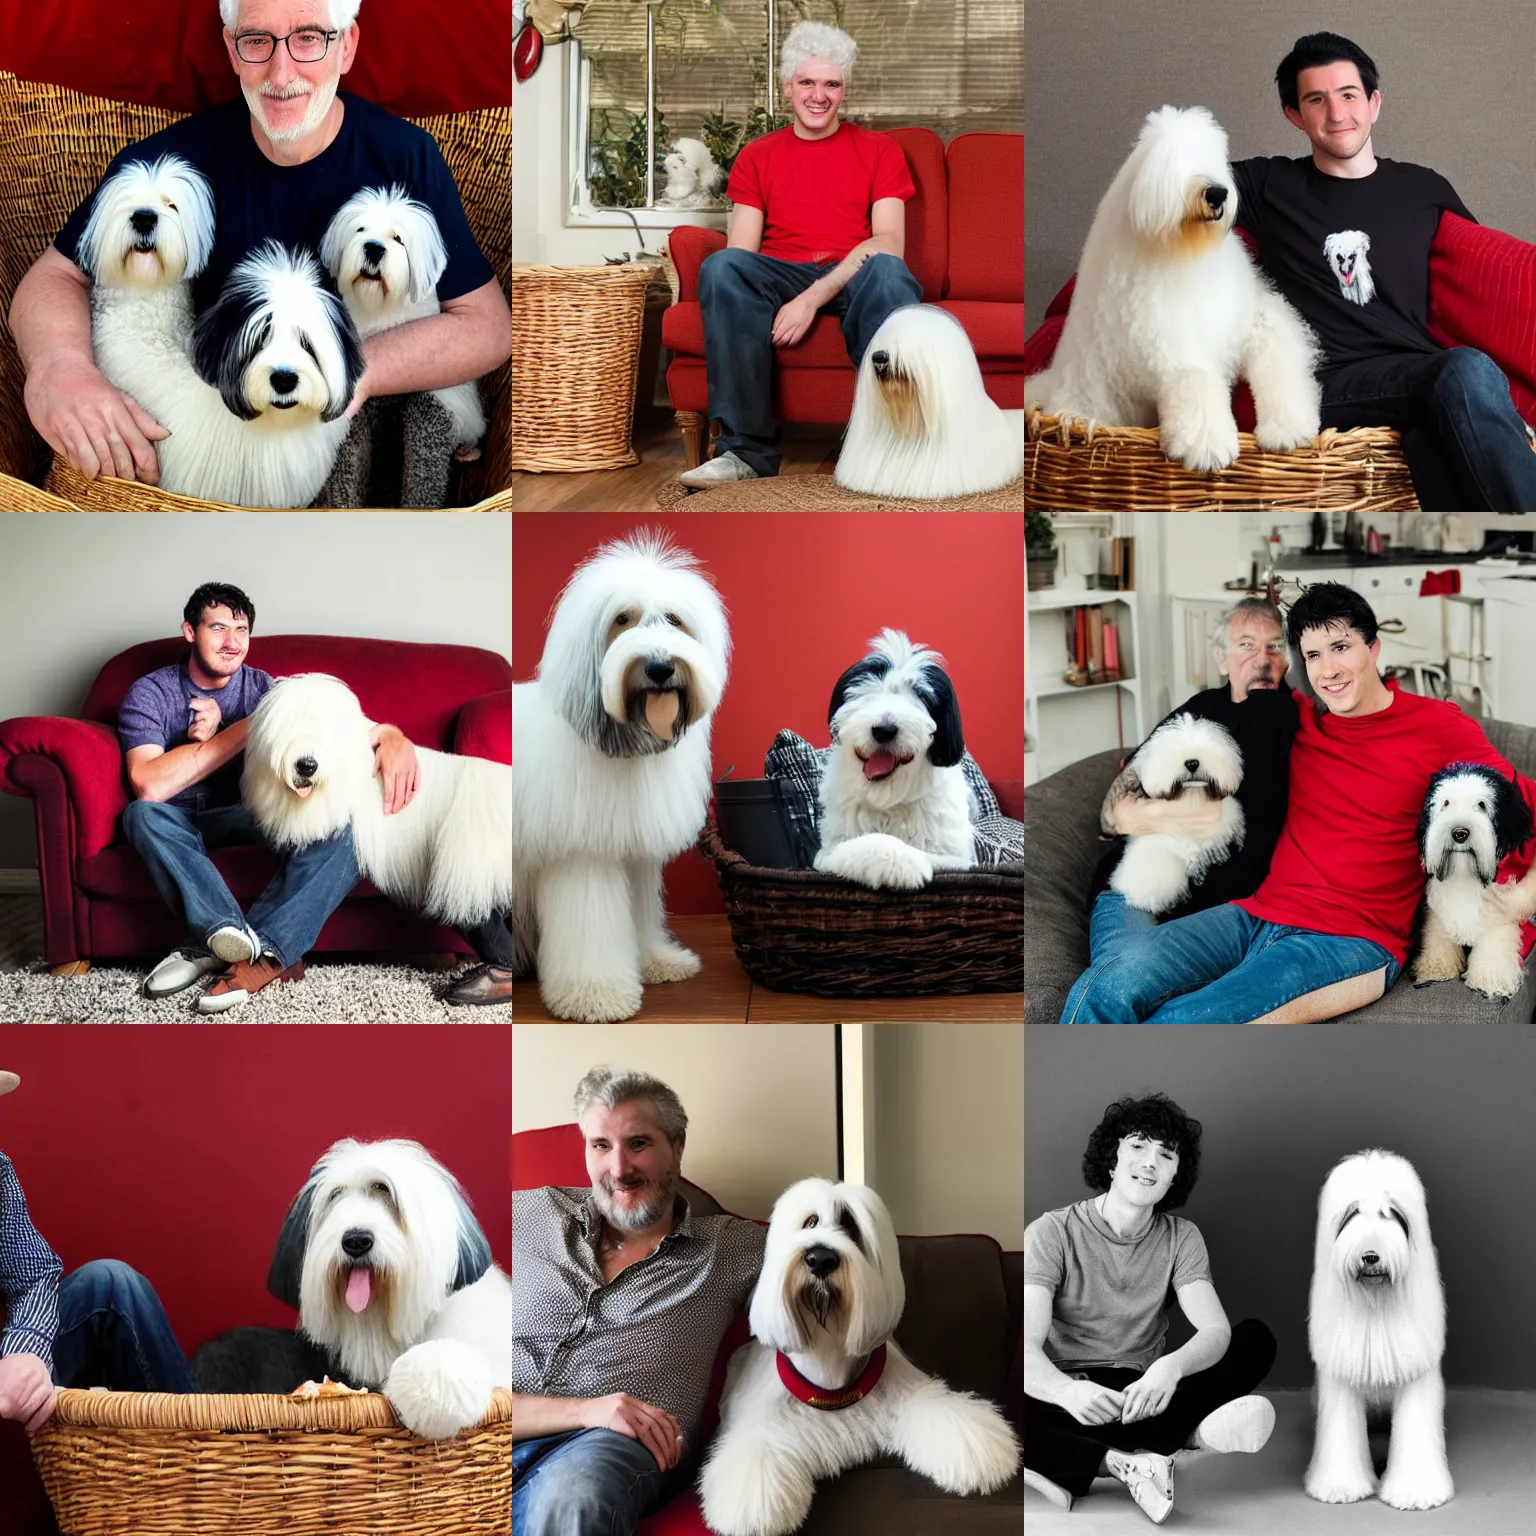 Prompt: an old English sheepdog in a basket with next to him a 30 year old skinny man with short black hair and a red shirt sitting on the couch